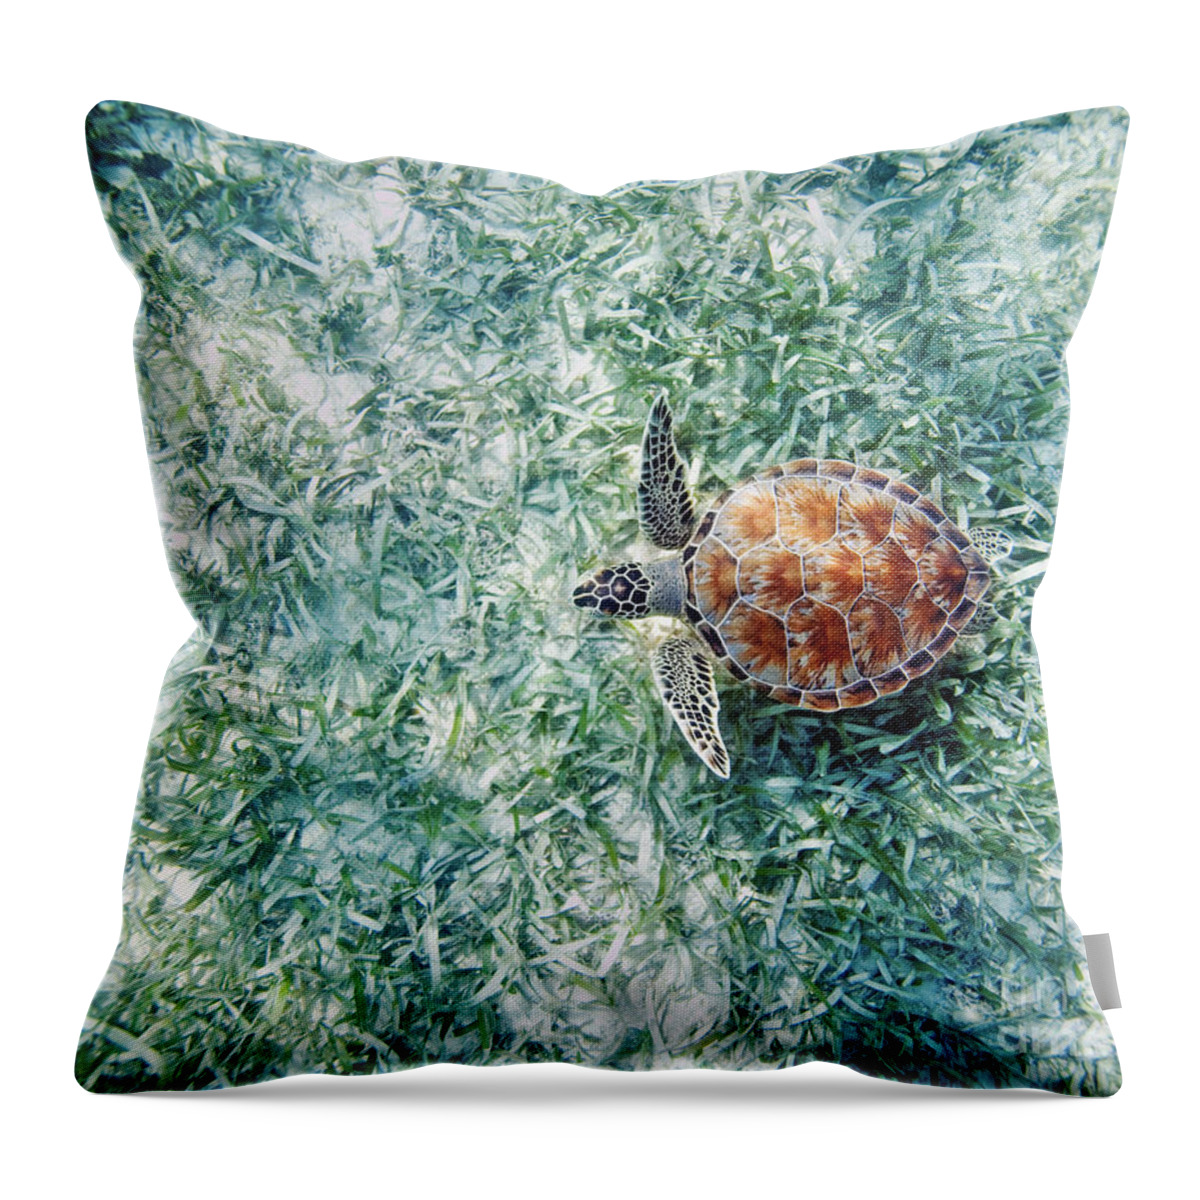 Animal Art Throw Pillow featuring the photograph Turtle Underwater Scene by M Swiet Productions